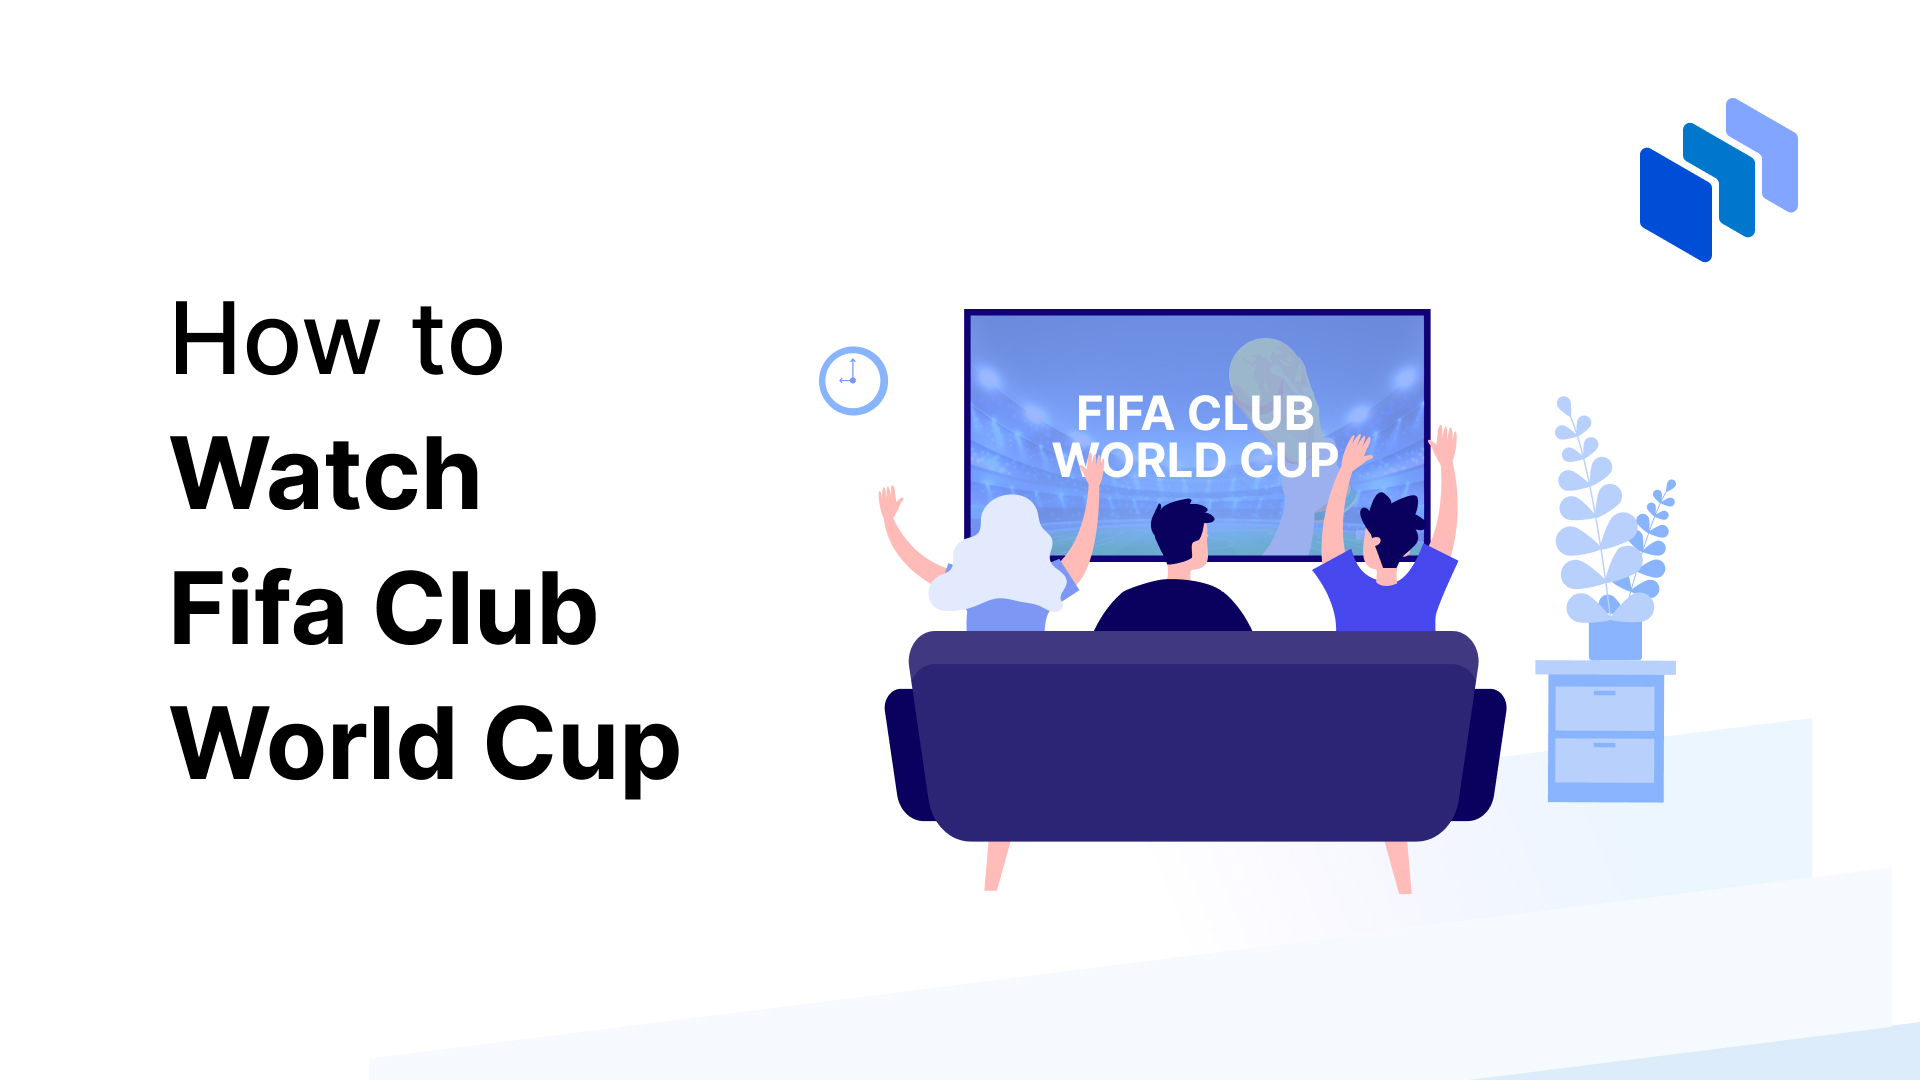 How to Watch FIFA Club World Cup